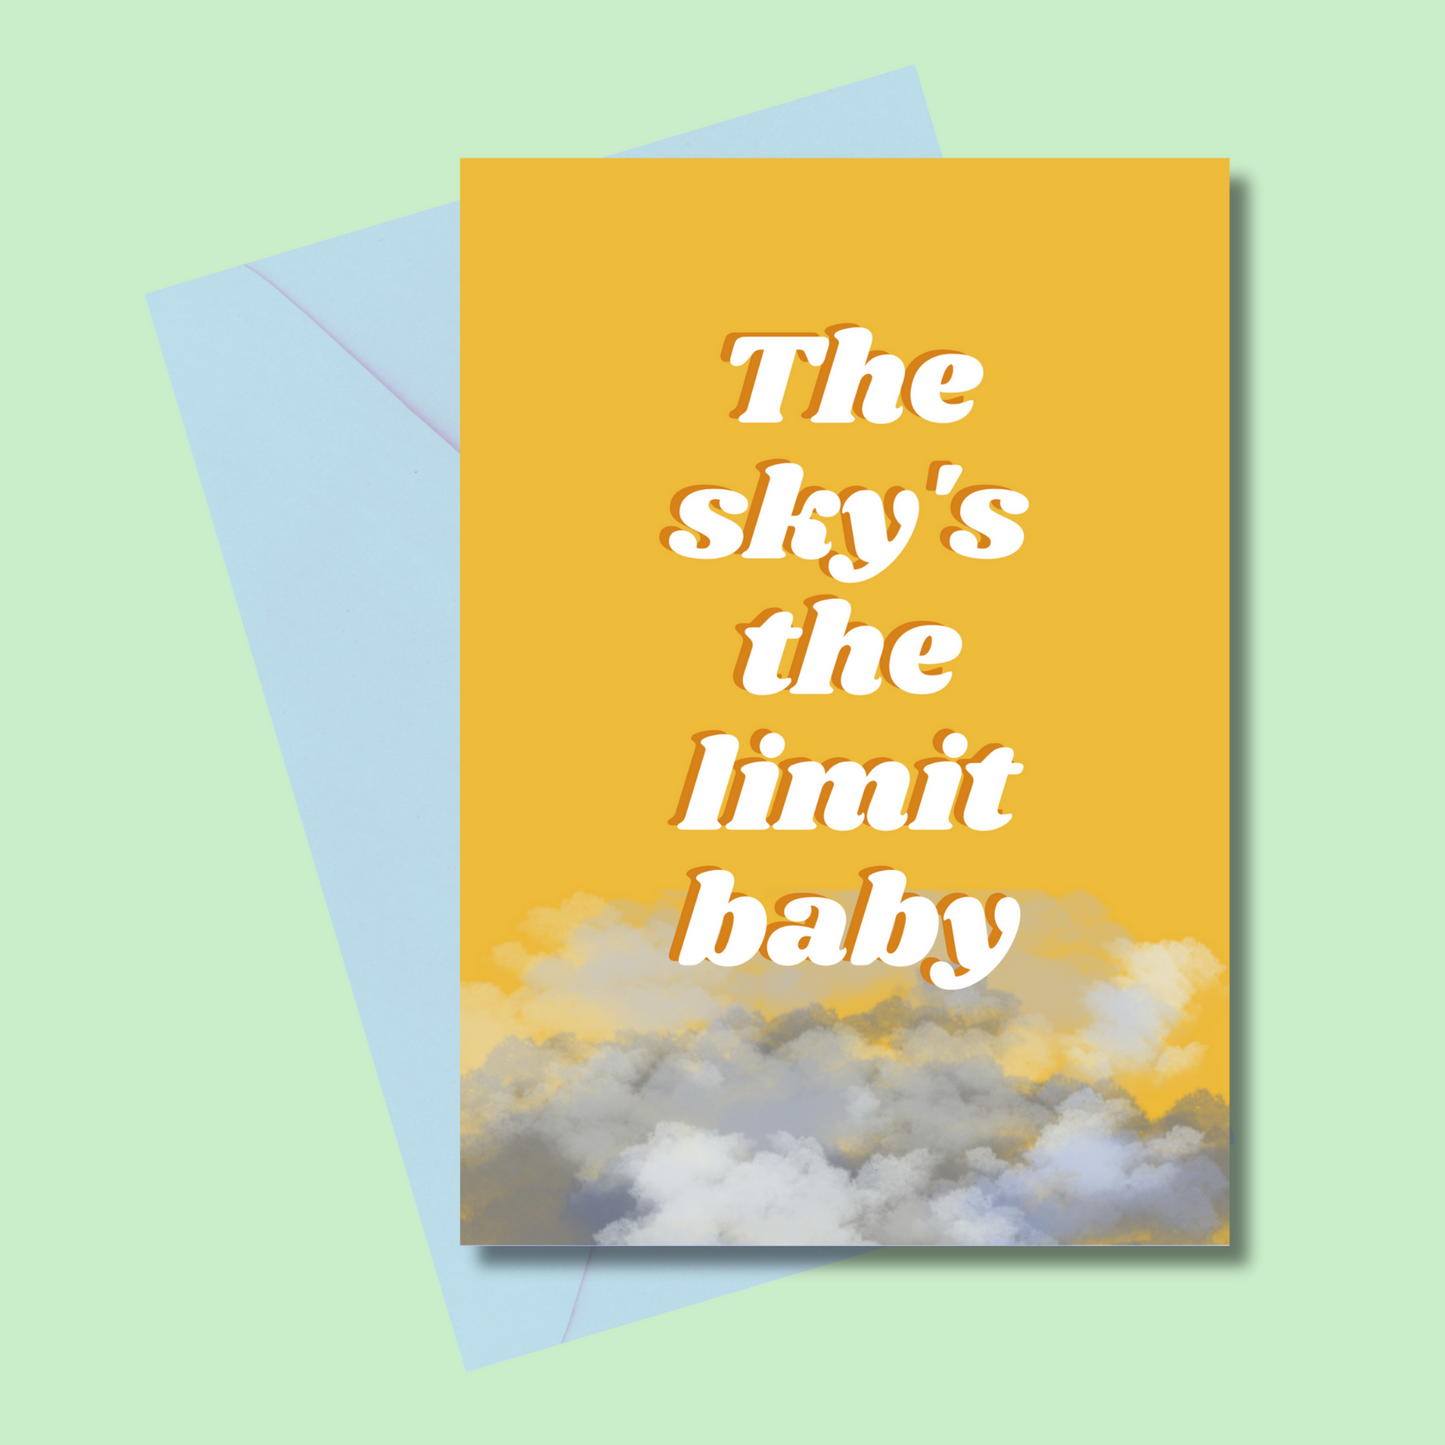 The sky's the limit baby  (5x7” print/card)